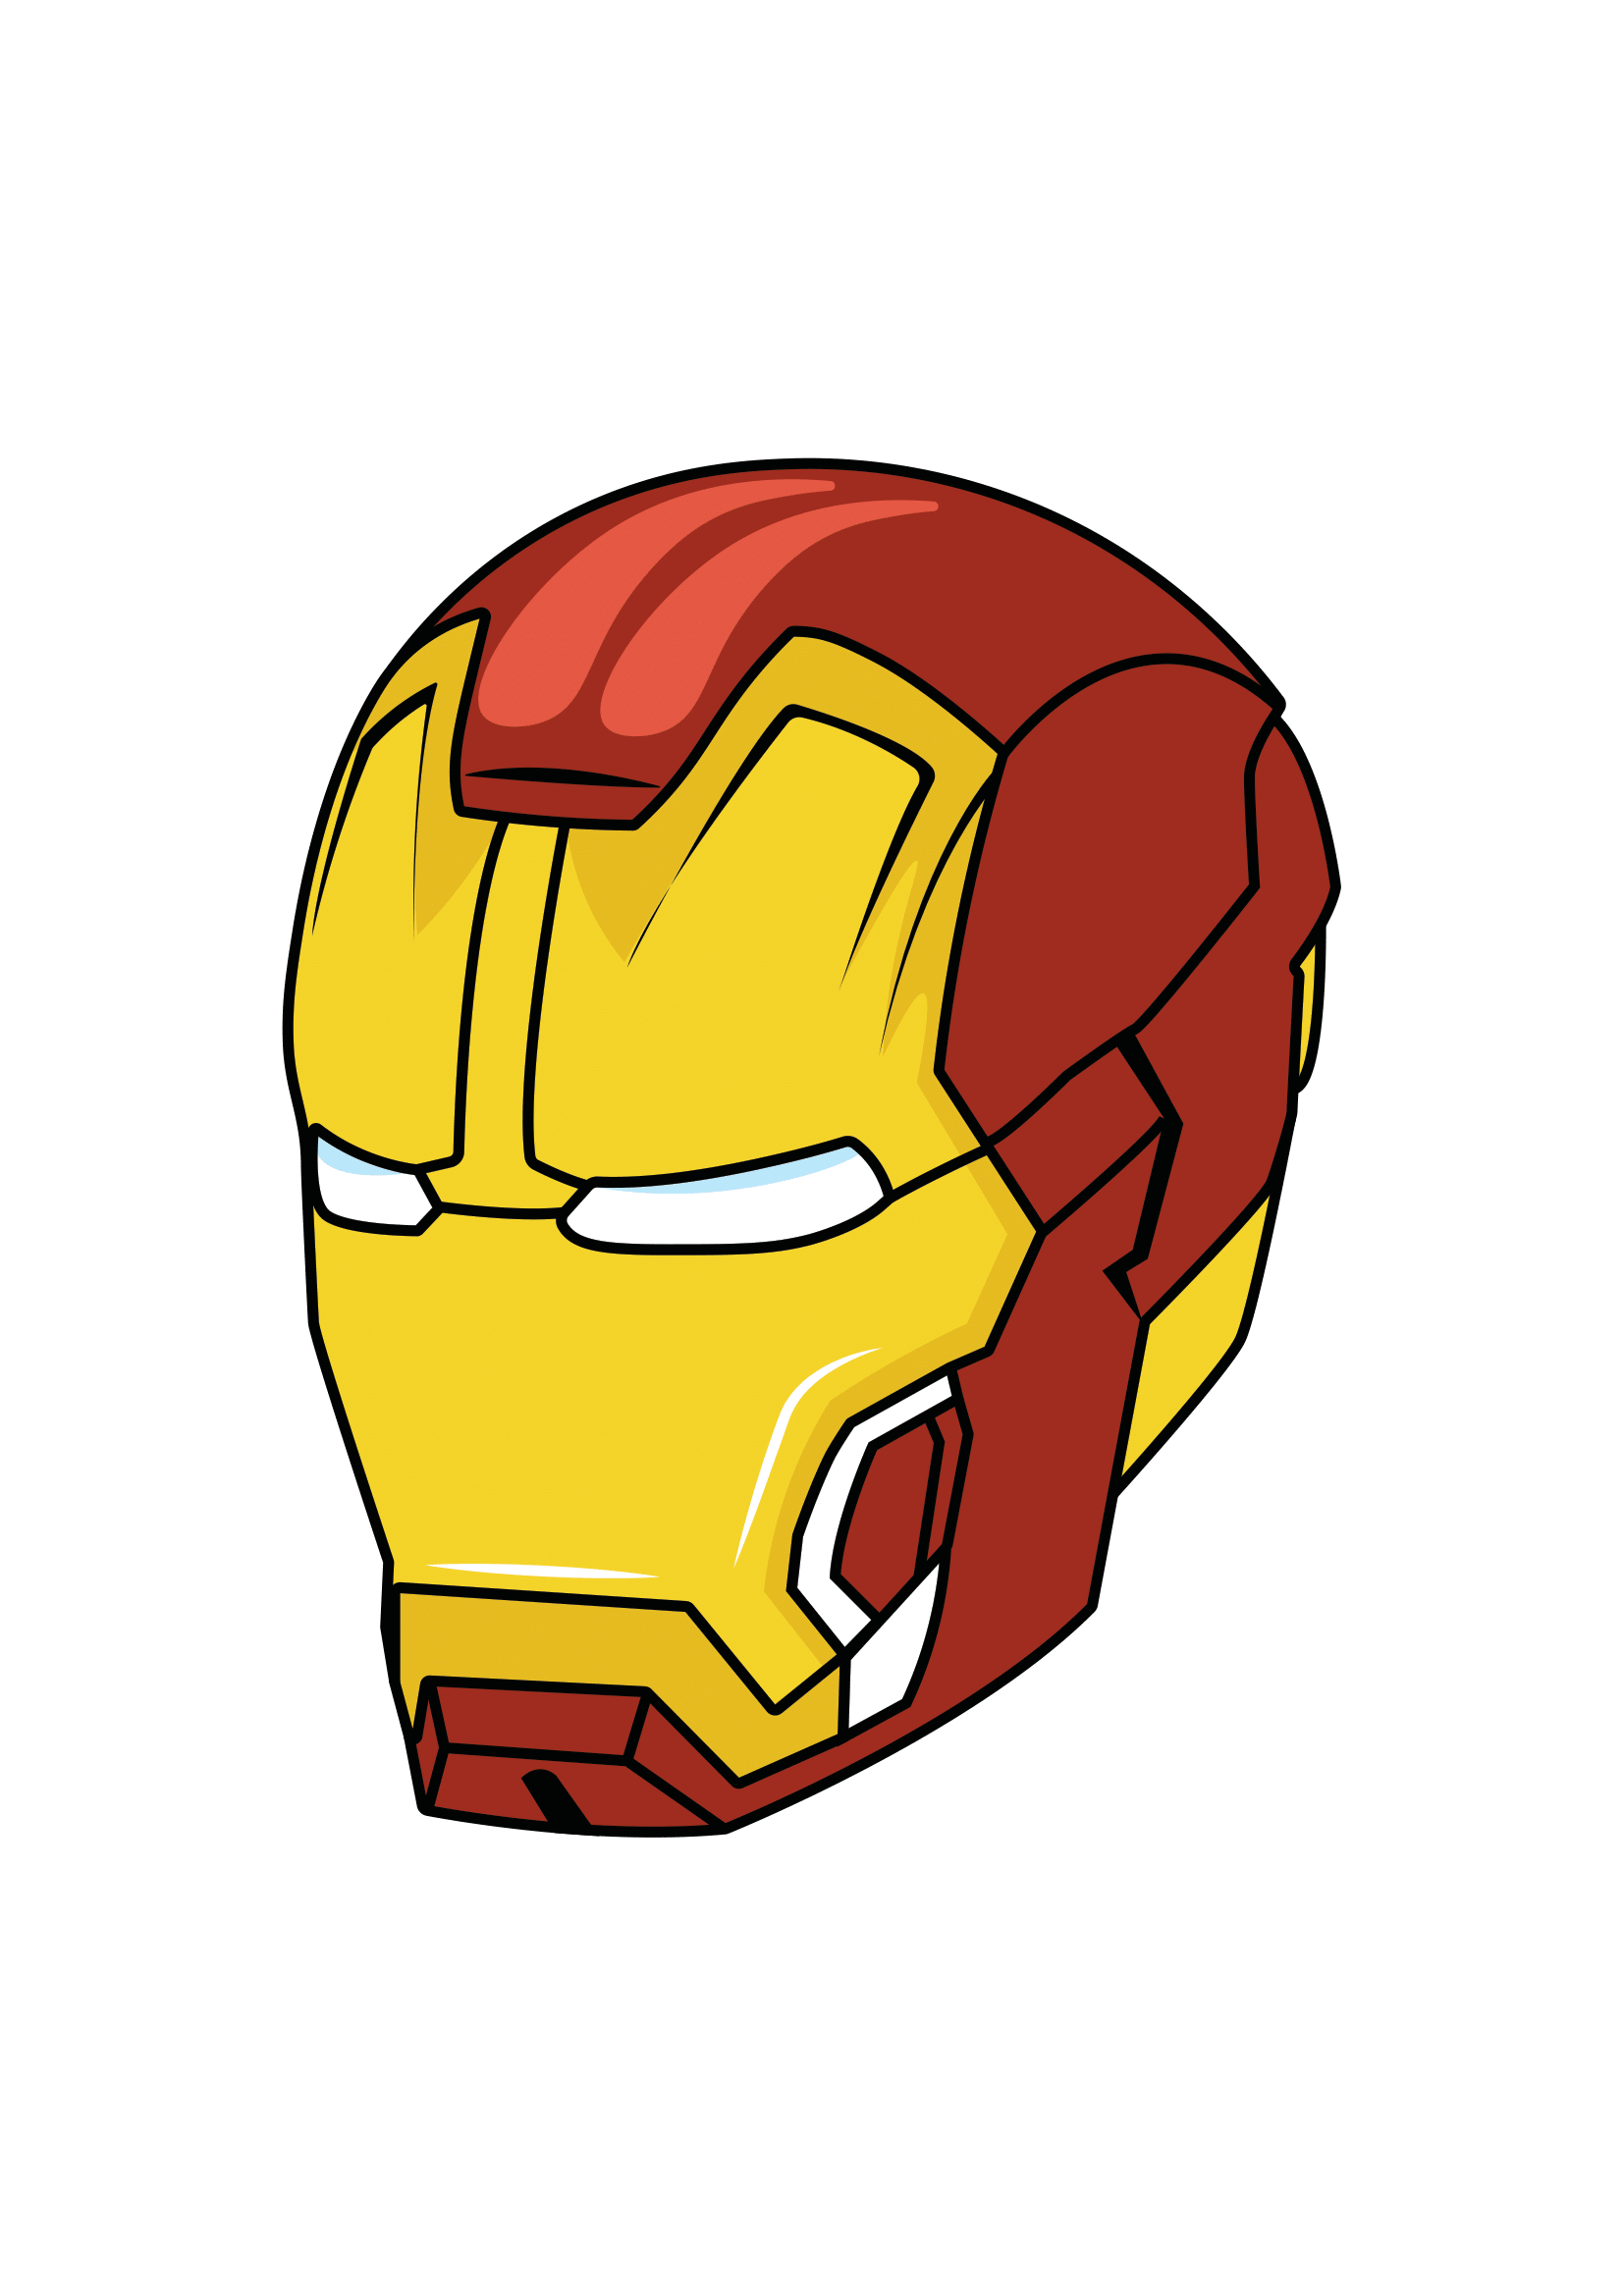 How to Draw The Iron Man Helmet Step by Step Printable